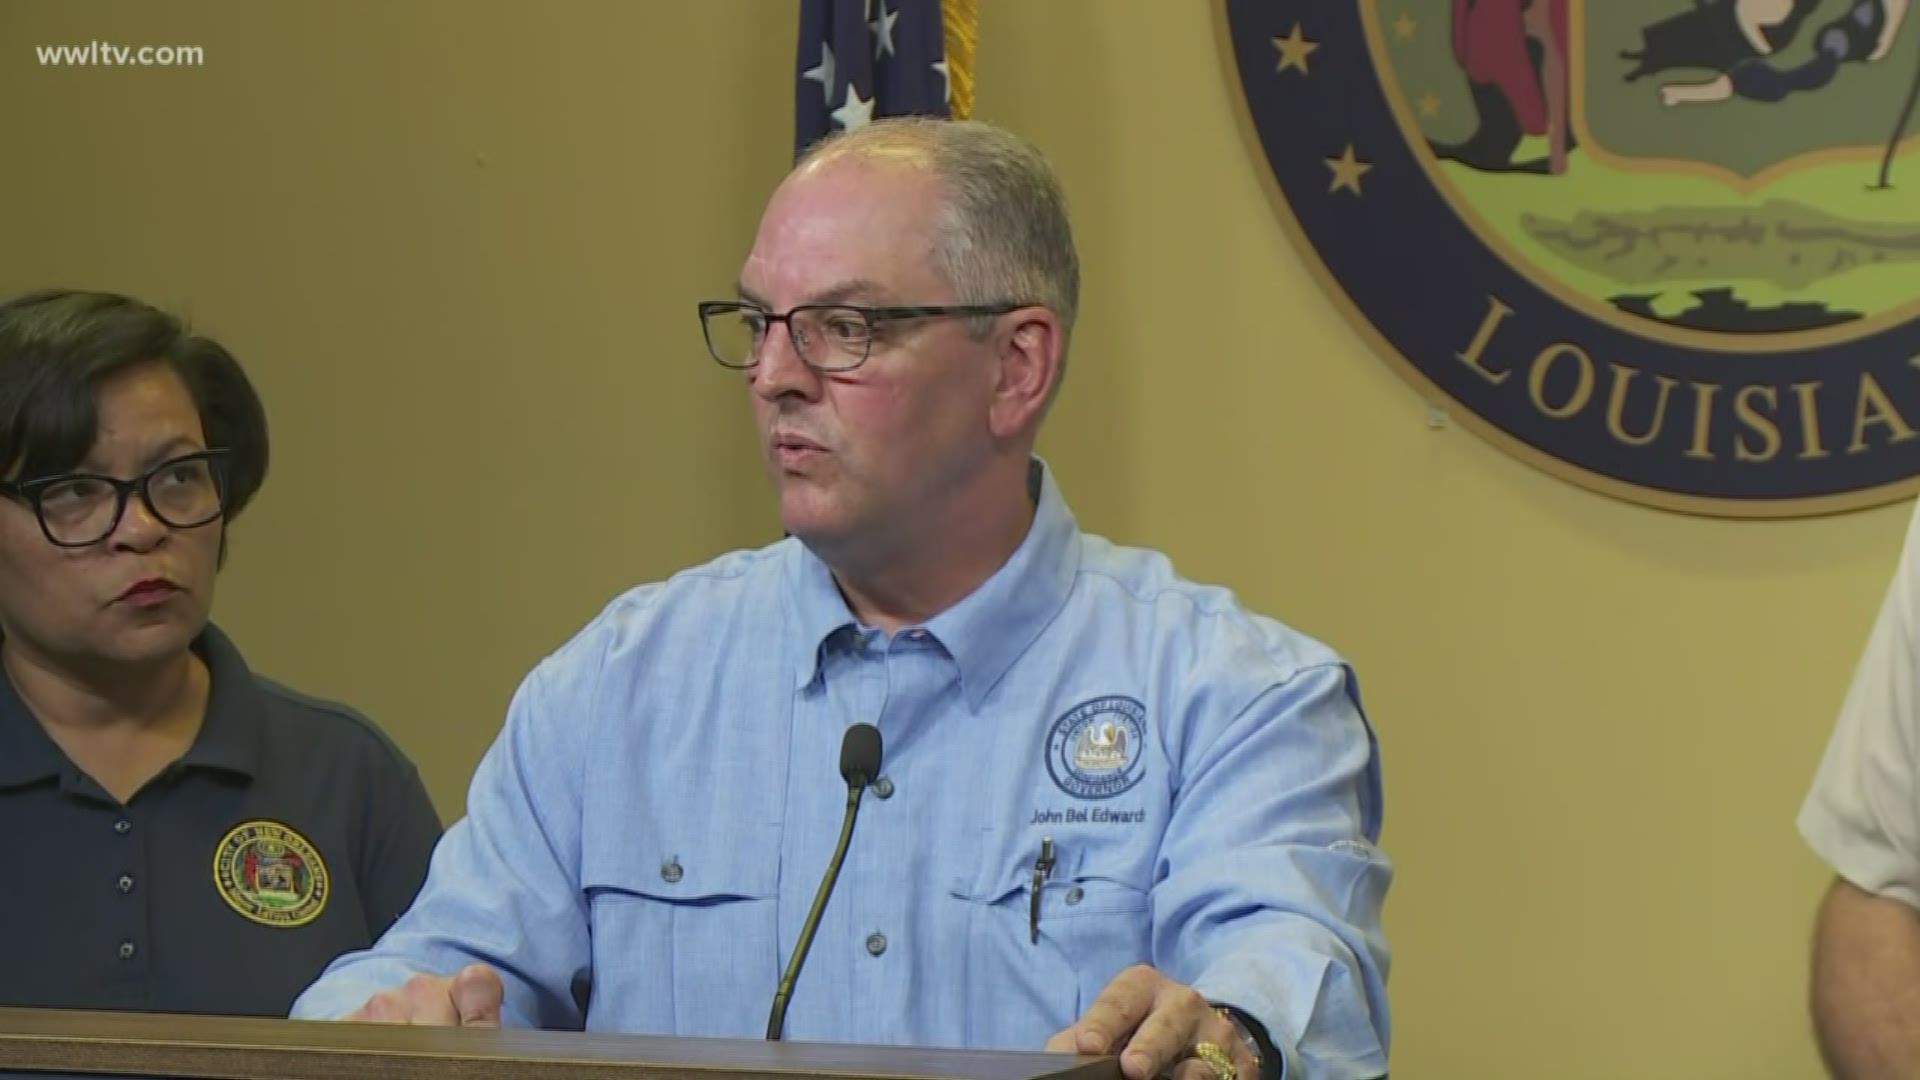 Governor Edwards says the storm is going to be a heavy rain event which could produce life-threatening flooding.